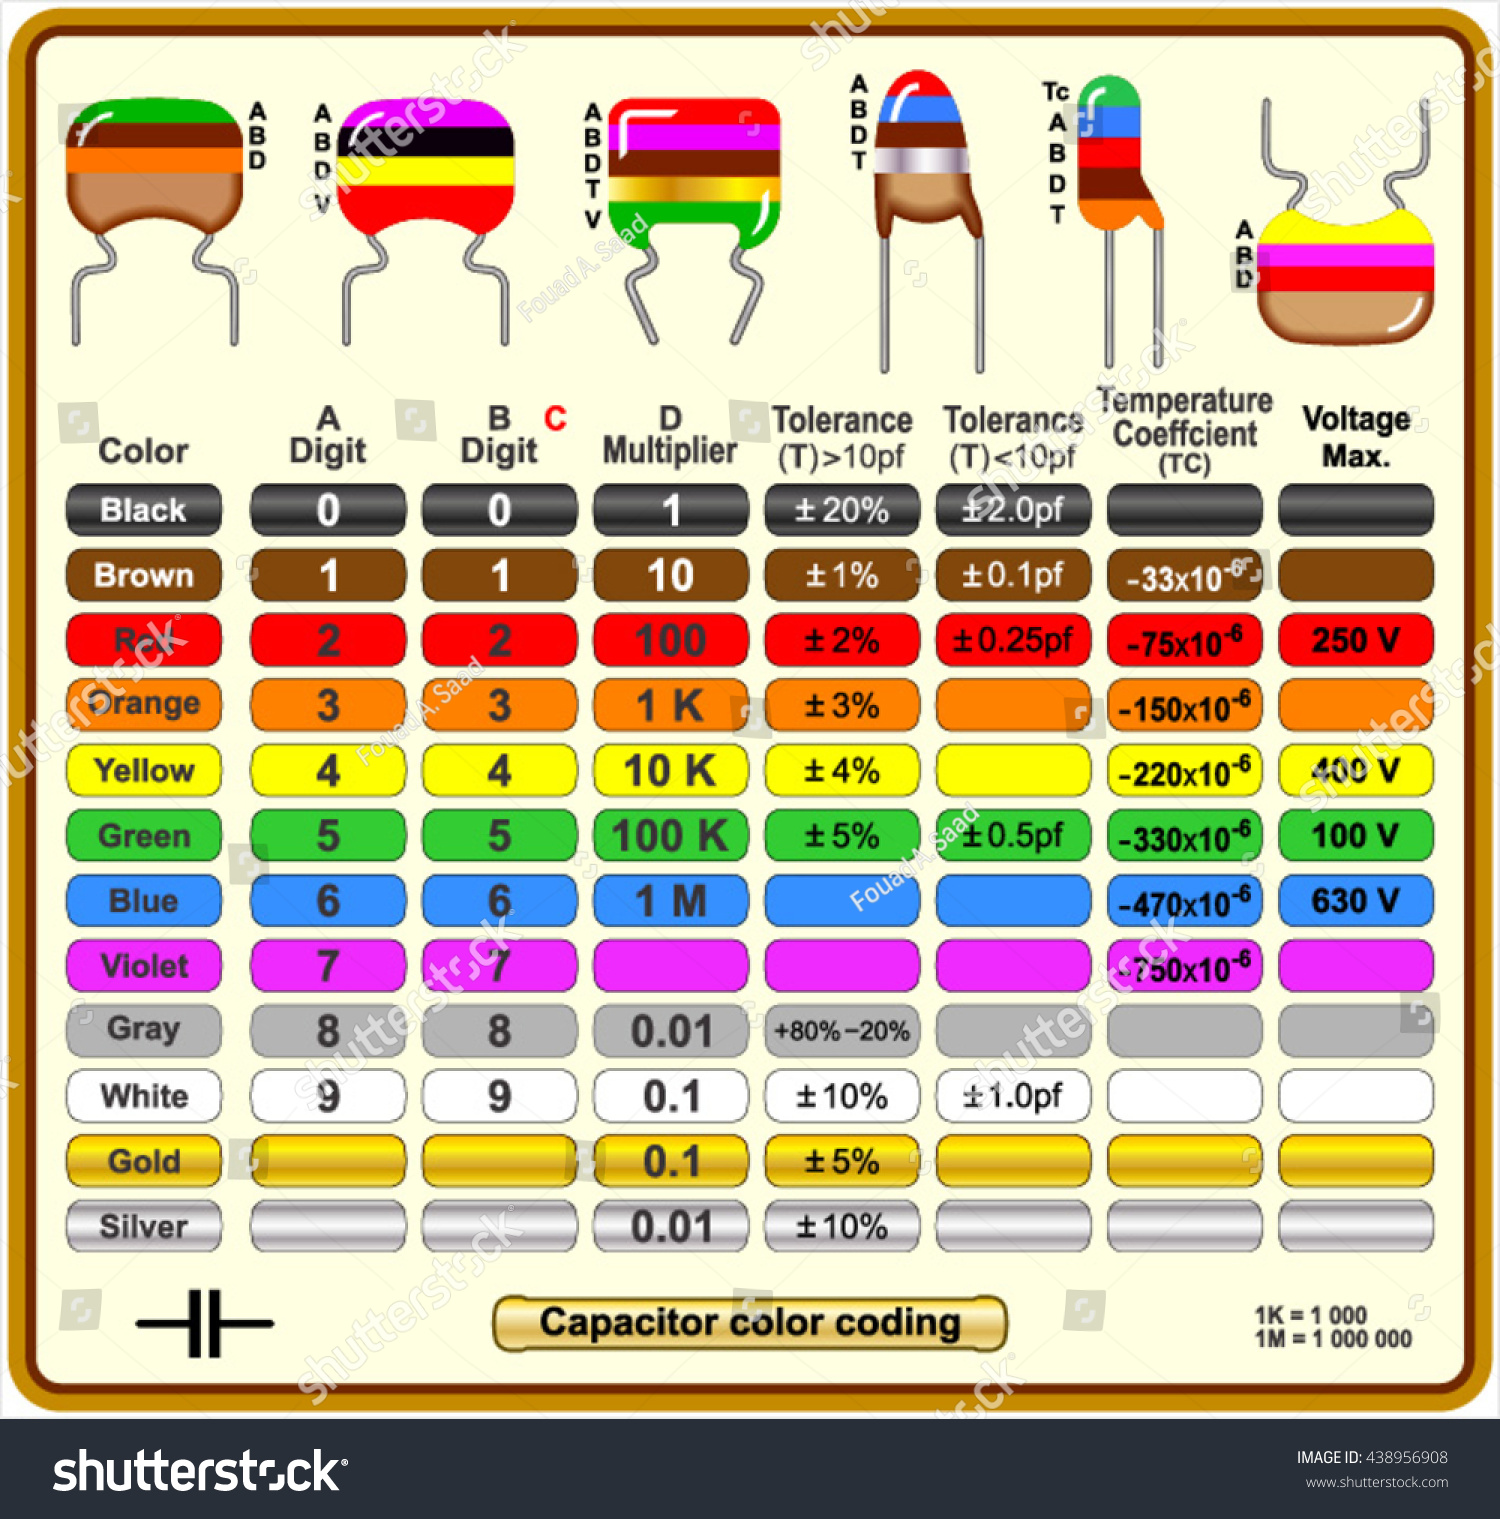 Capacitor Color Coding Stock Vector 438956908 - Shutterstock